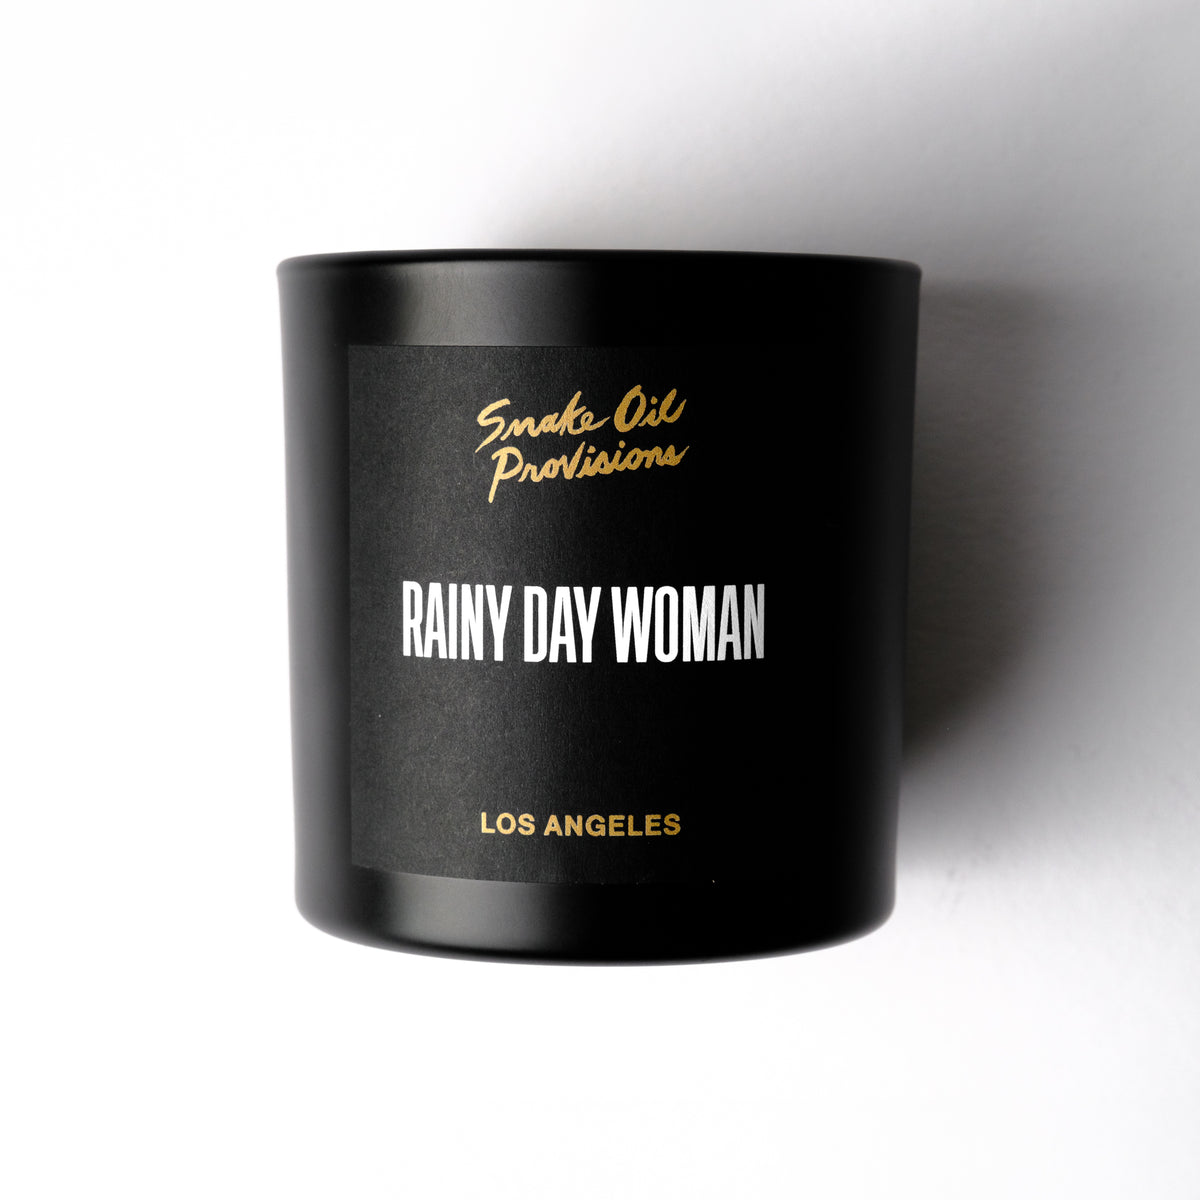 Snake Oil Provisions Rainy Day Woman — 7.2 oz Hand Poured Candle